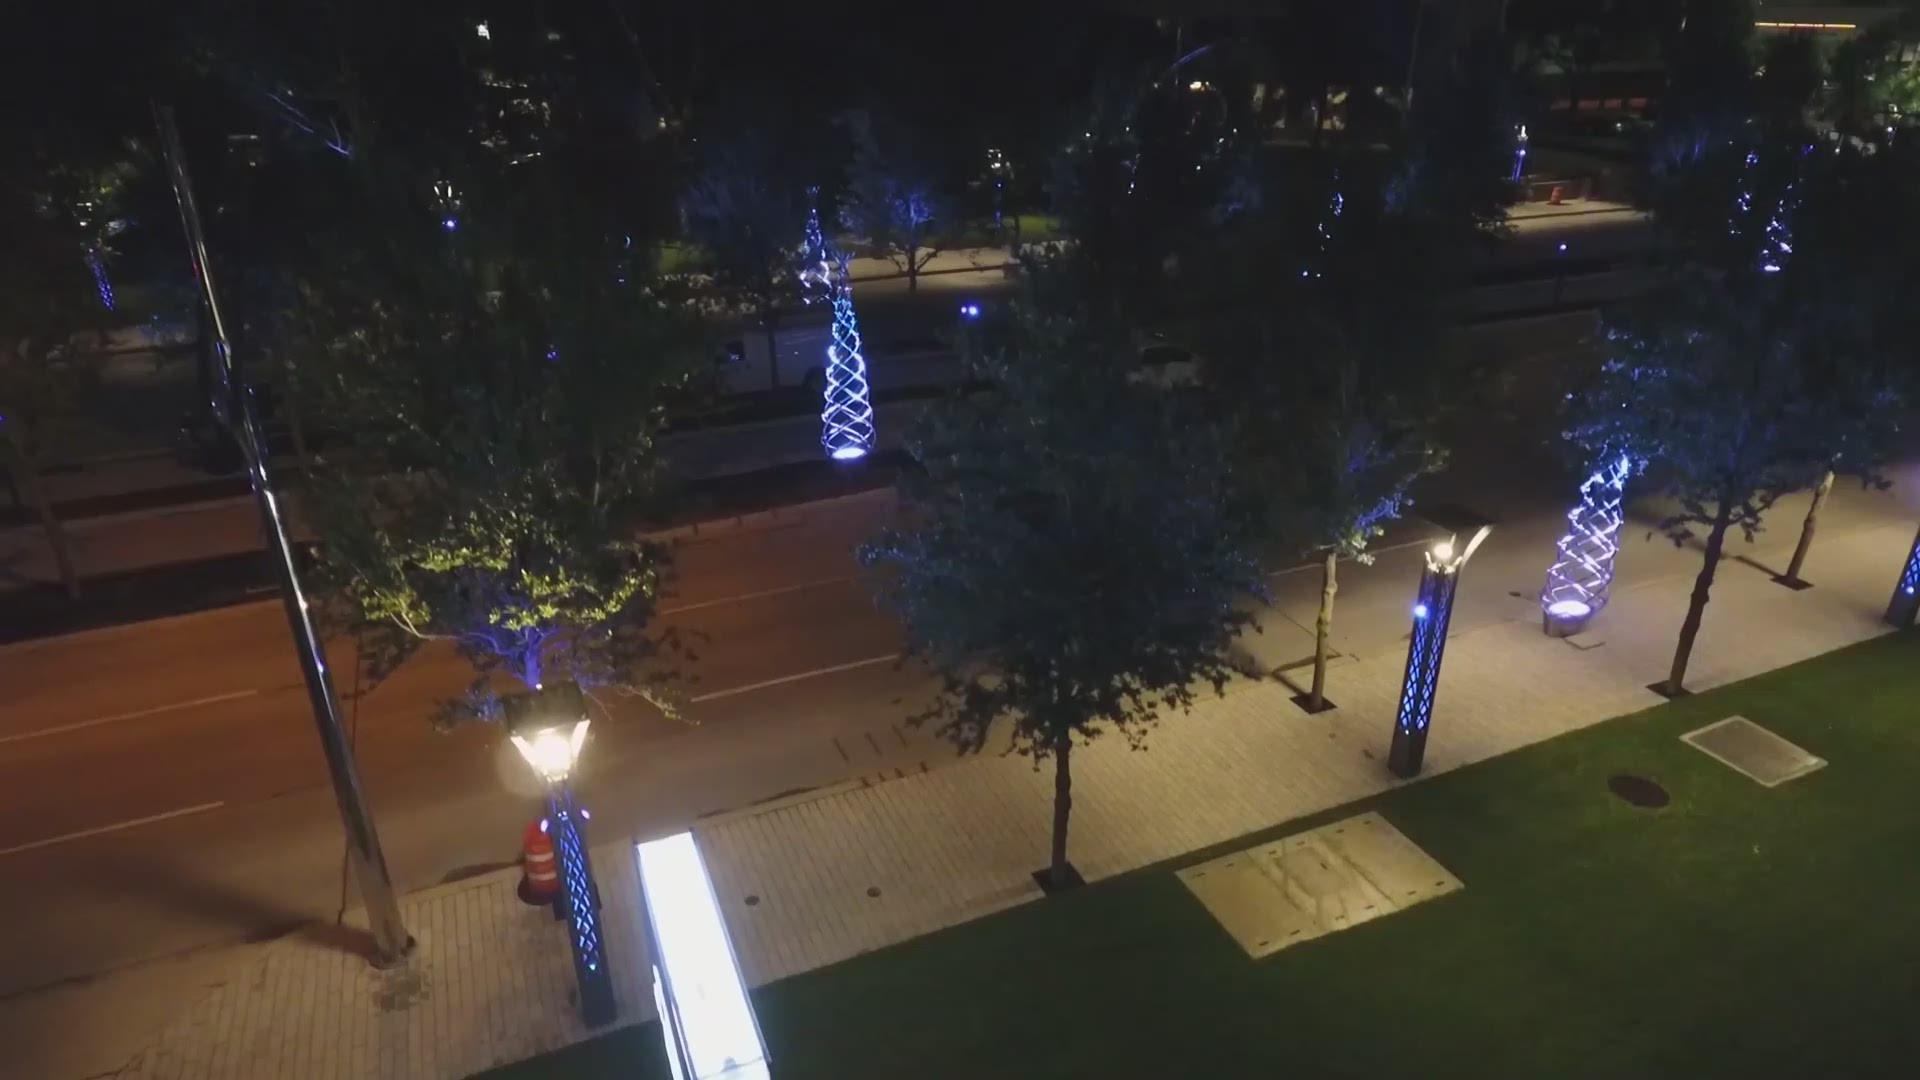 After two years' worth of construction on Post Oak Boulevard, Uptown Holiday Lighting is back!